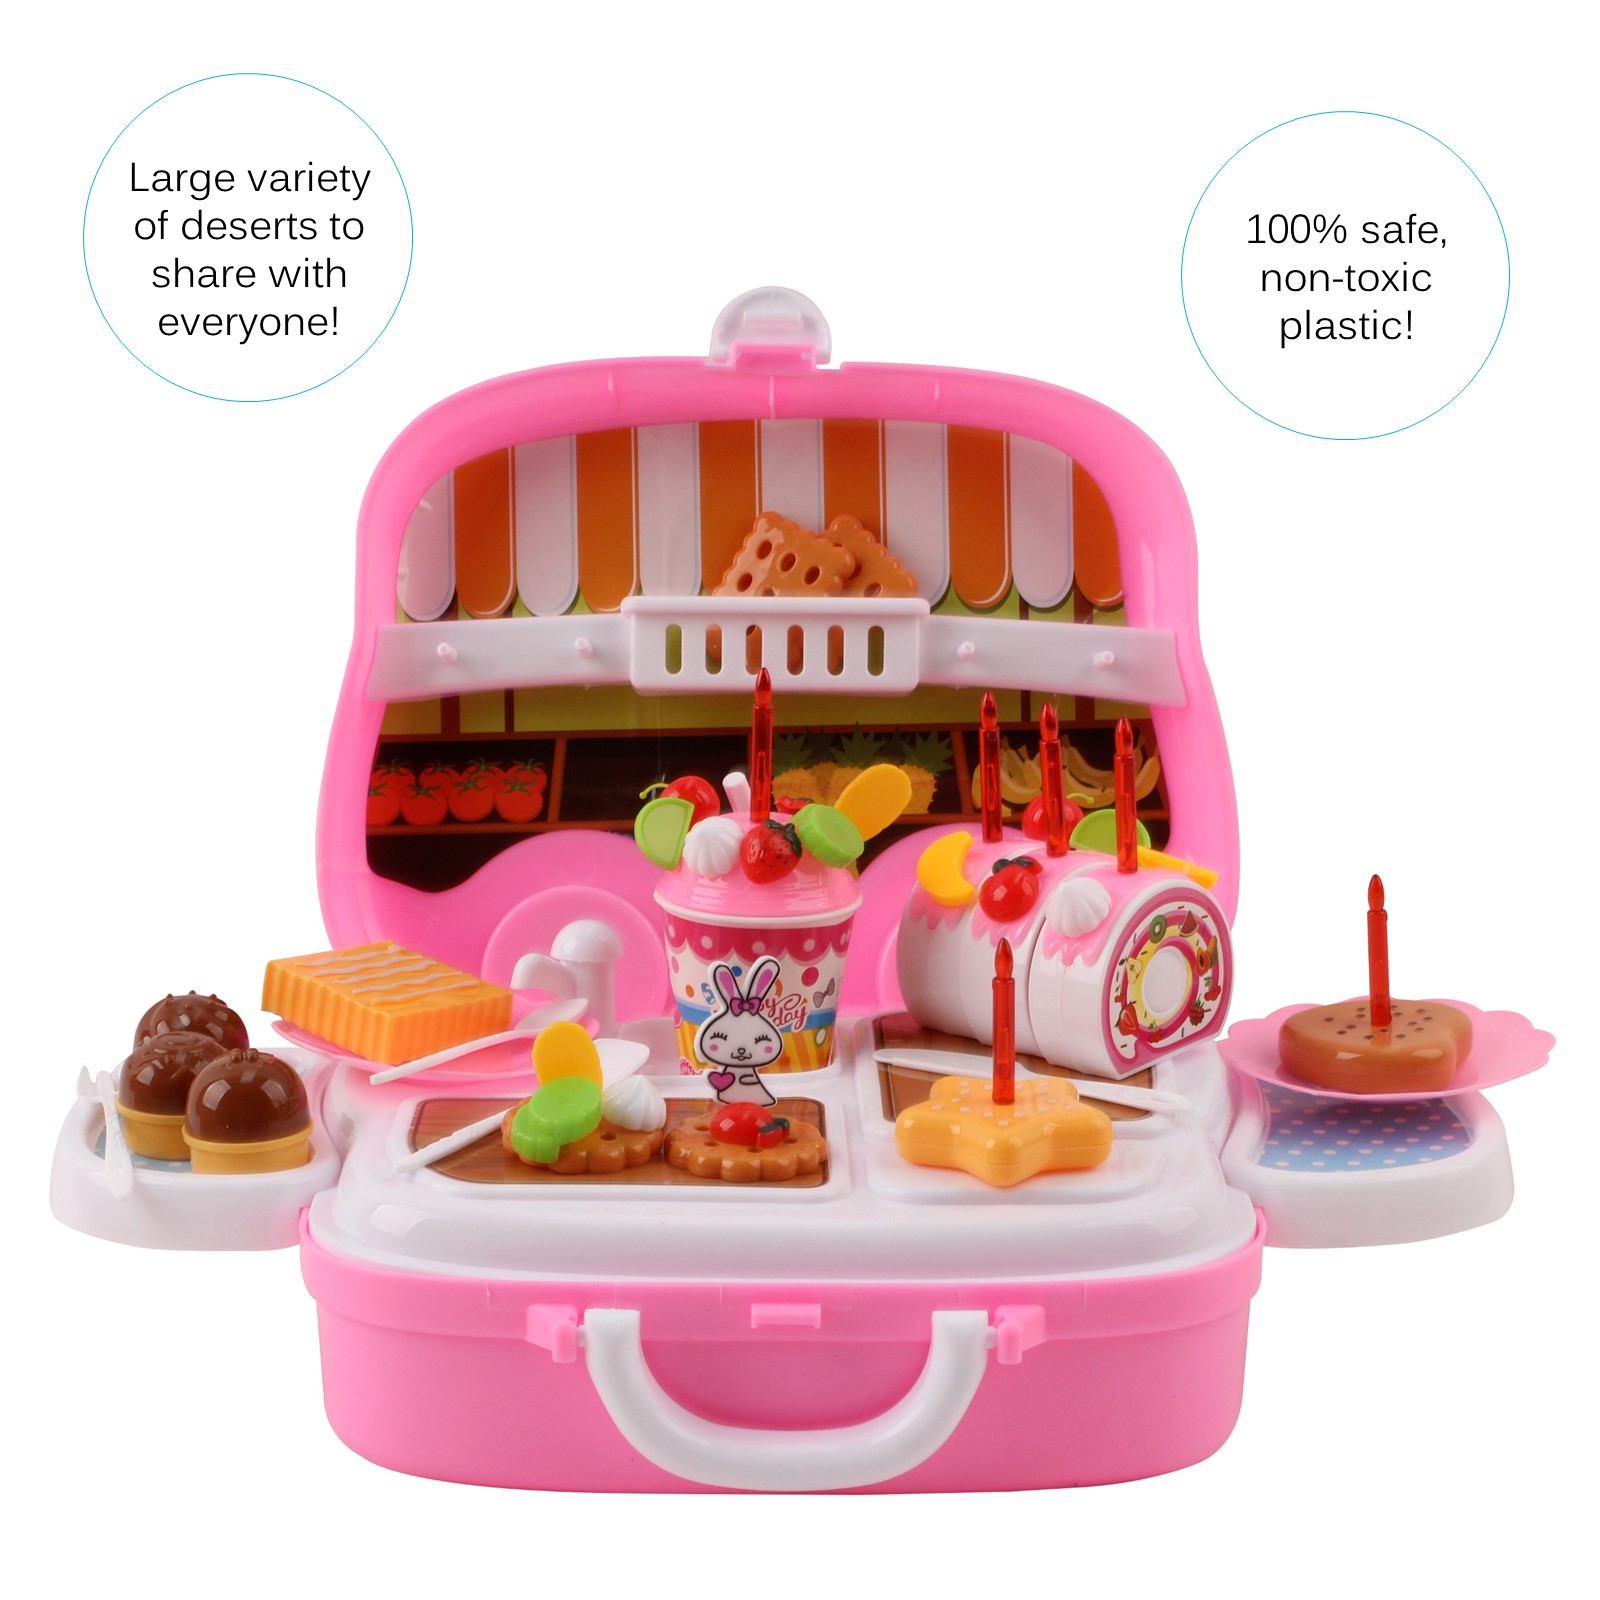 39 Pieces Large Portable Dessert Stand Birthday Cake Ice Cream Cart Candy Trolley Kitchen With Lights Music Candles Food Toys 3 feet tall Childrens Party Pretend Play Truck Folds Up in Suitcase Playset Appliance Set Pieces TK-11